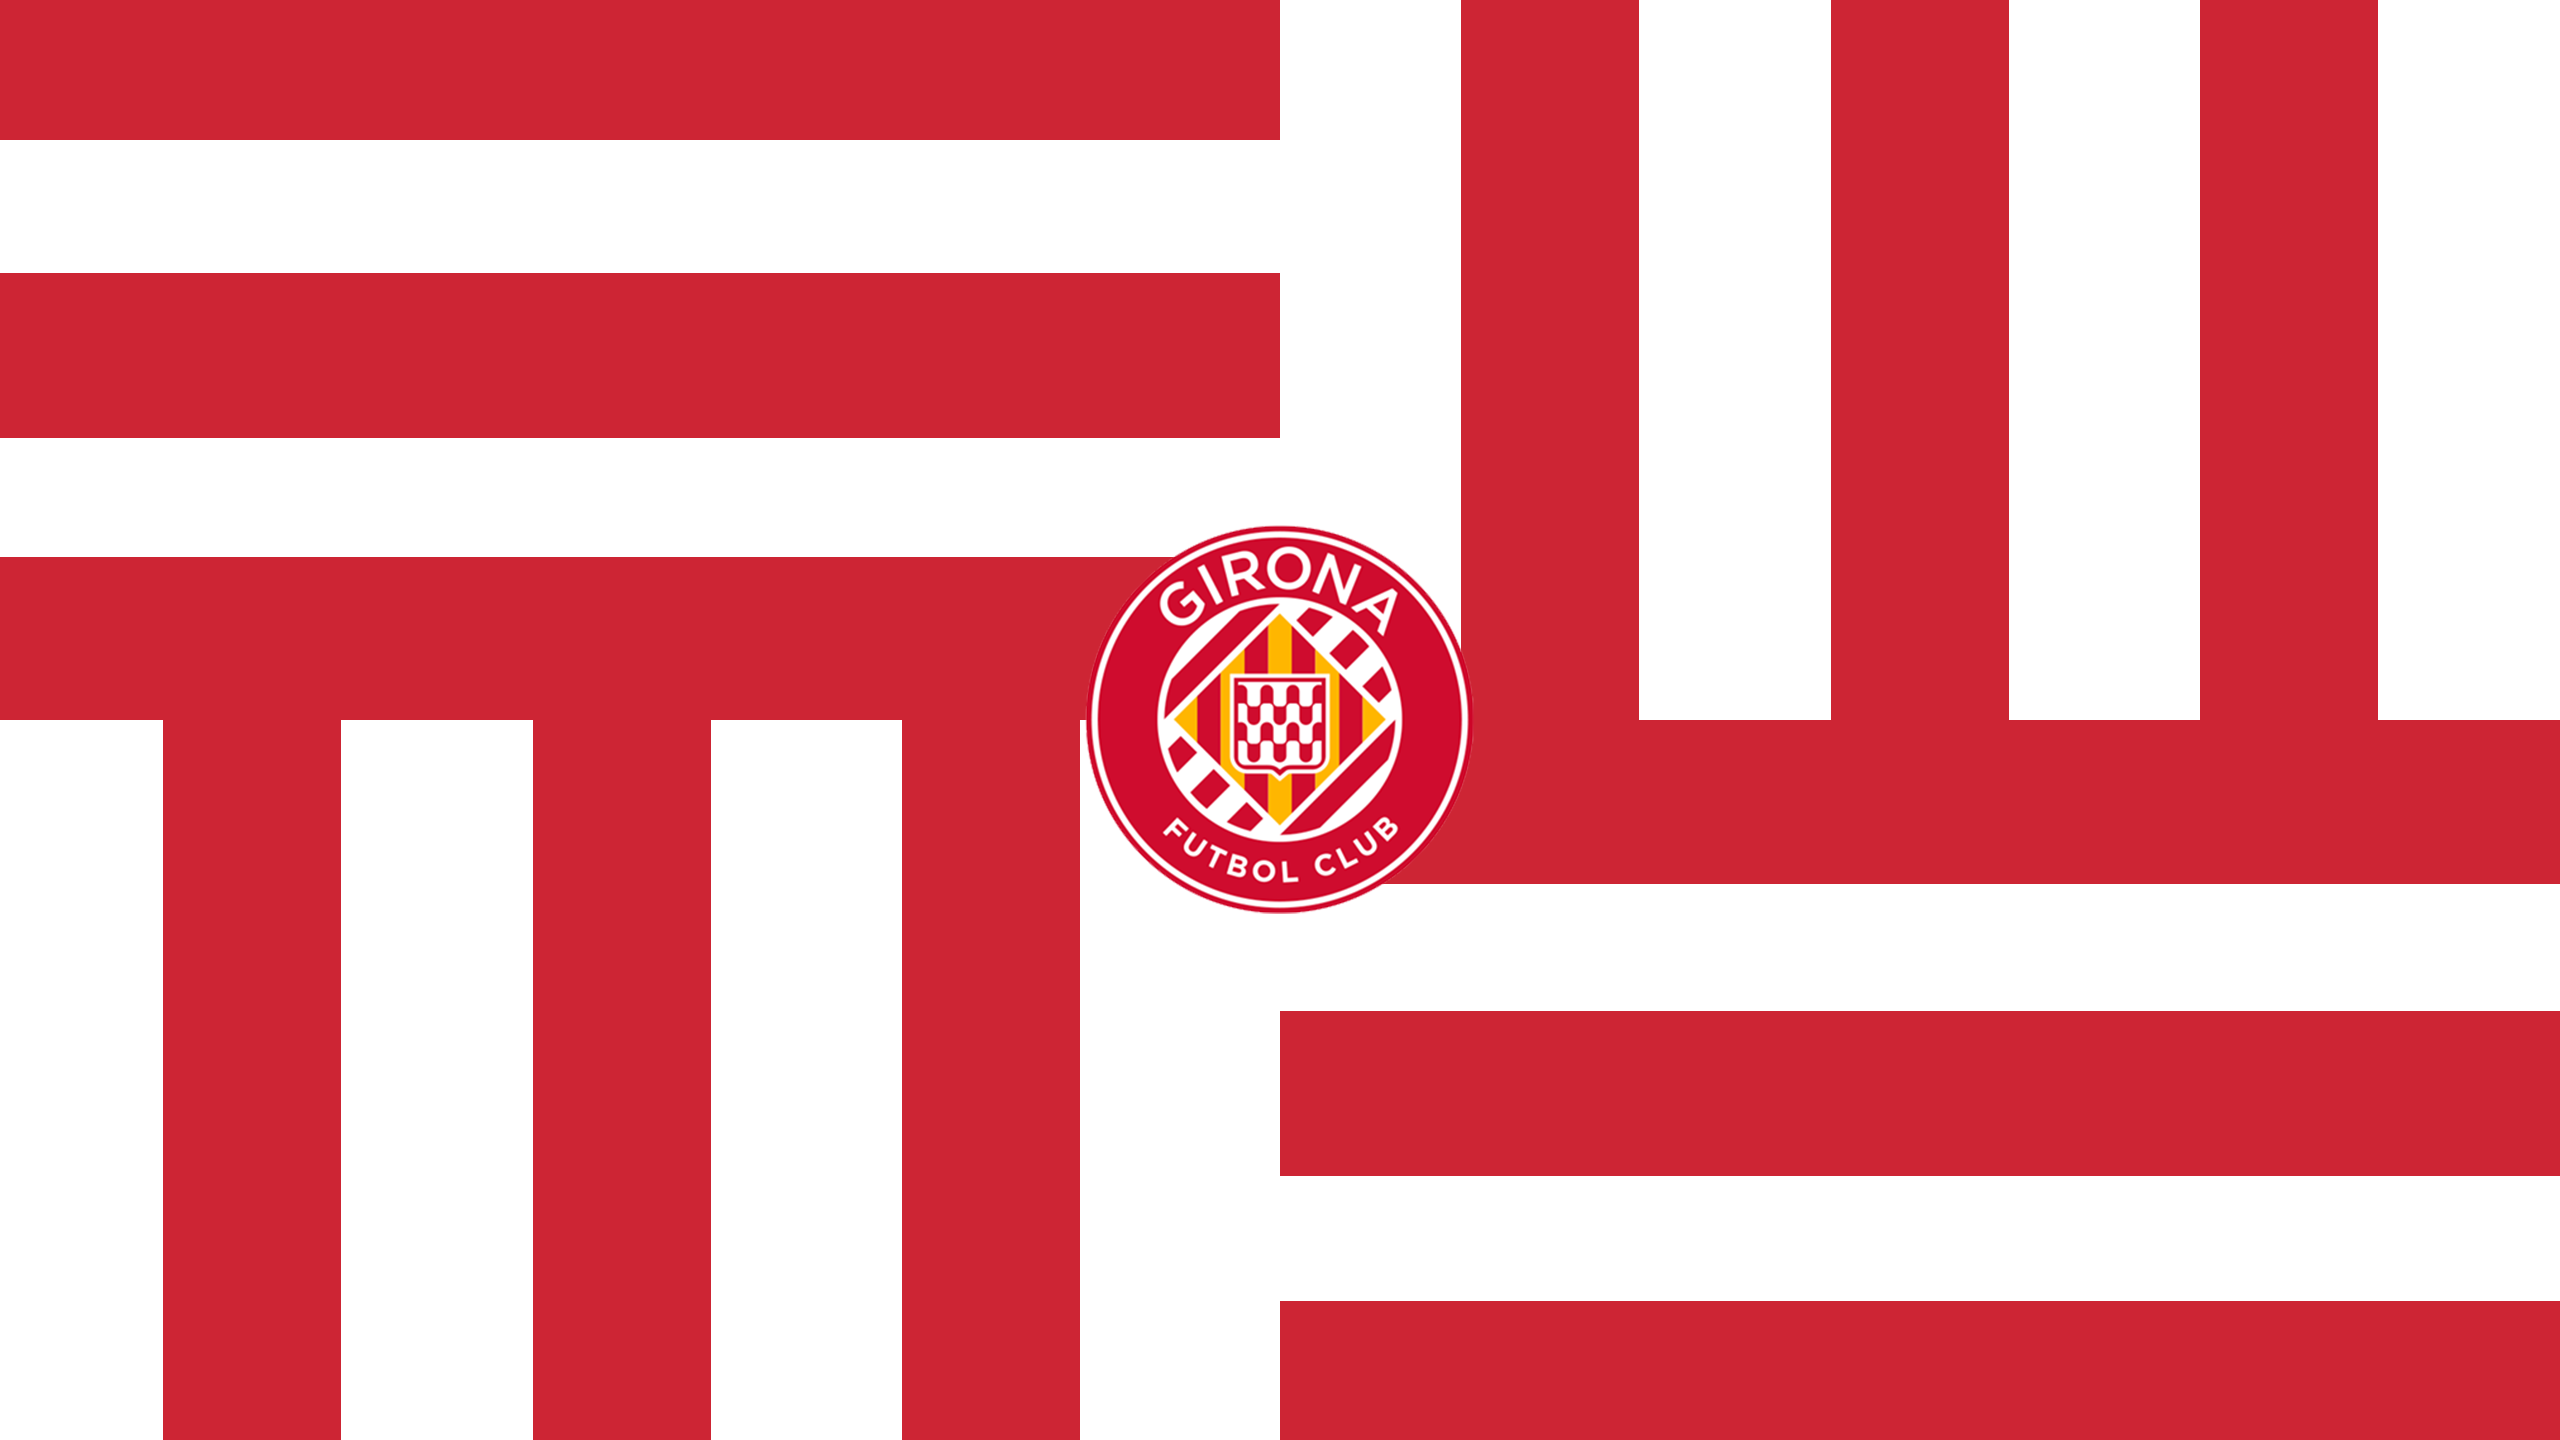 Girona FC emblem crest logo featured in high-definition desktop wallpaper for sports enthusiasts.